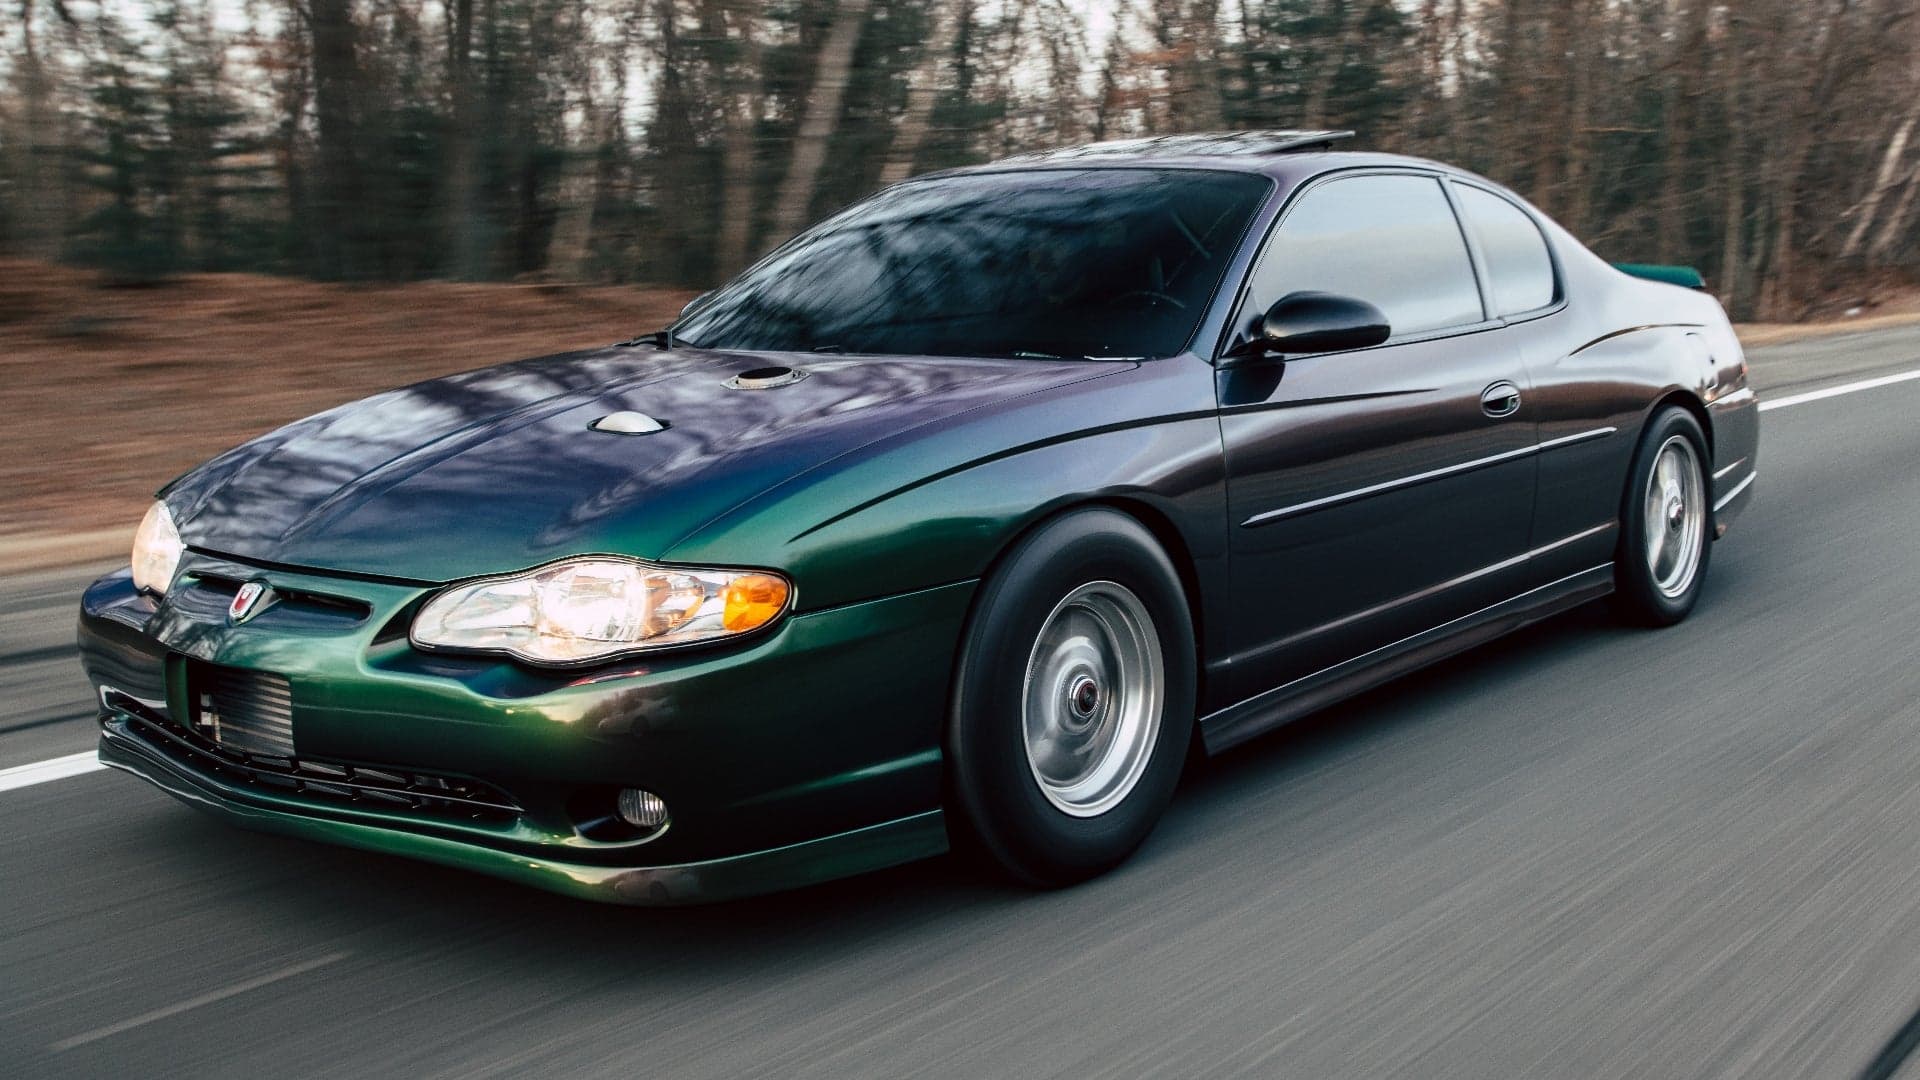 Turbo LS-Swapped 2004 Chevrolet Monte Carlo Makes 766 HP at the Front Wheels